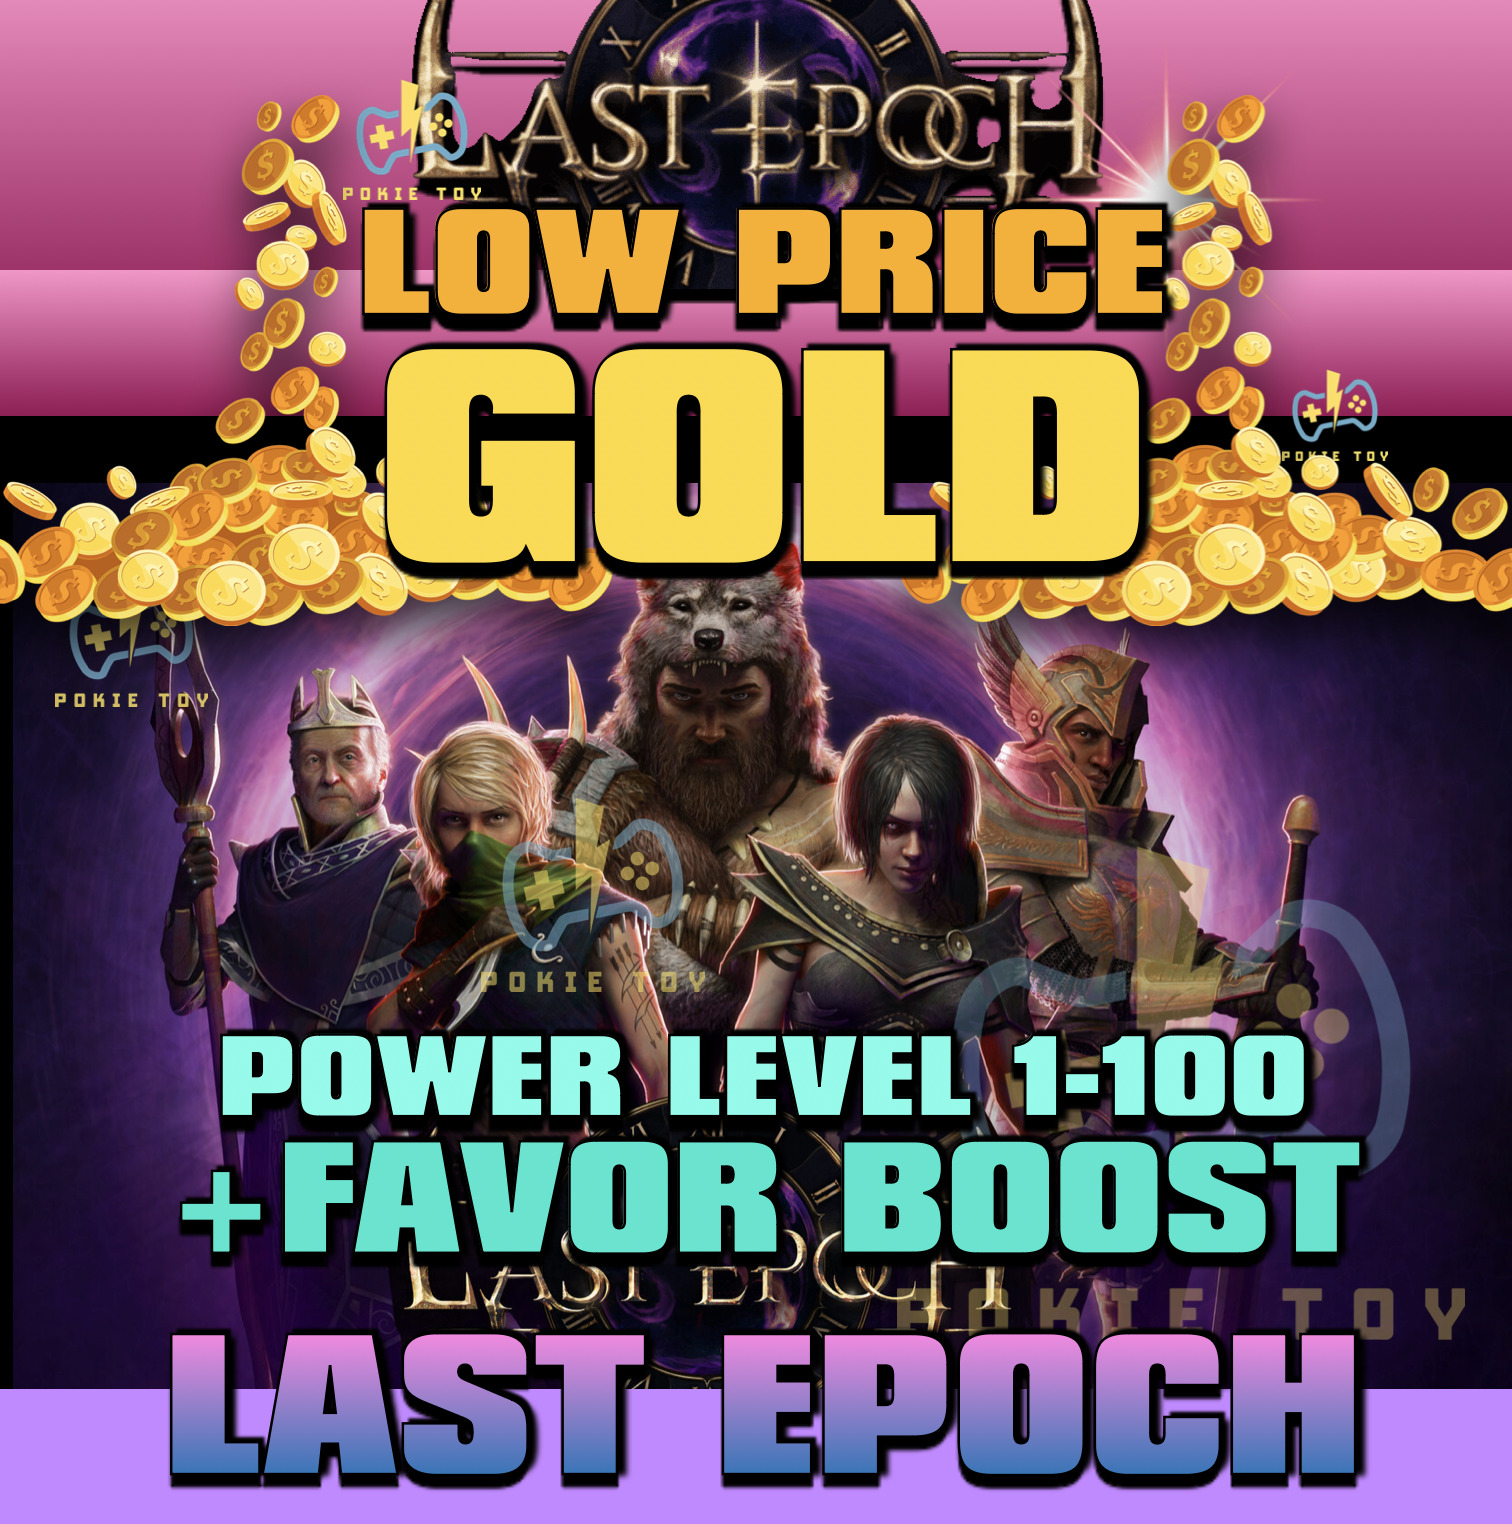 🔥LAST EPOCH SEASON/CYCLE🔥GOLD 50M-2000M + POWER LEVEL + FAVOR BOOST 🔥SOFTCORE